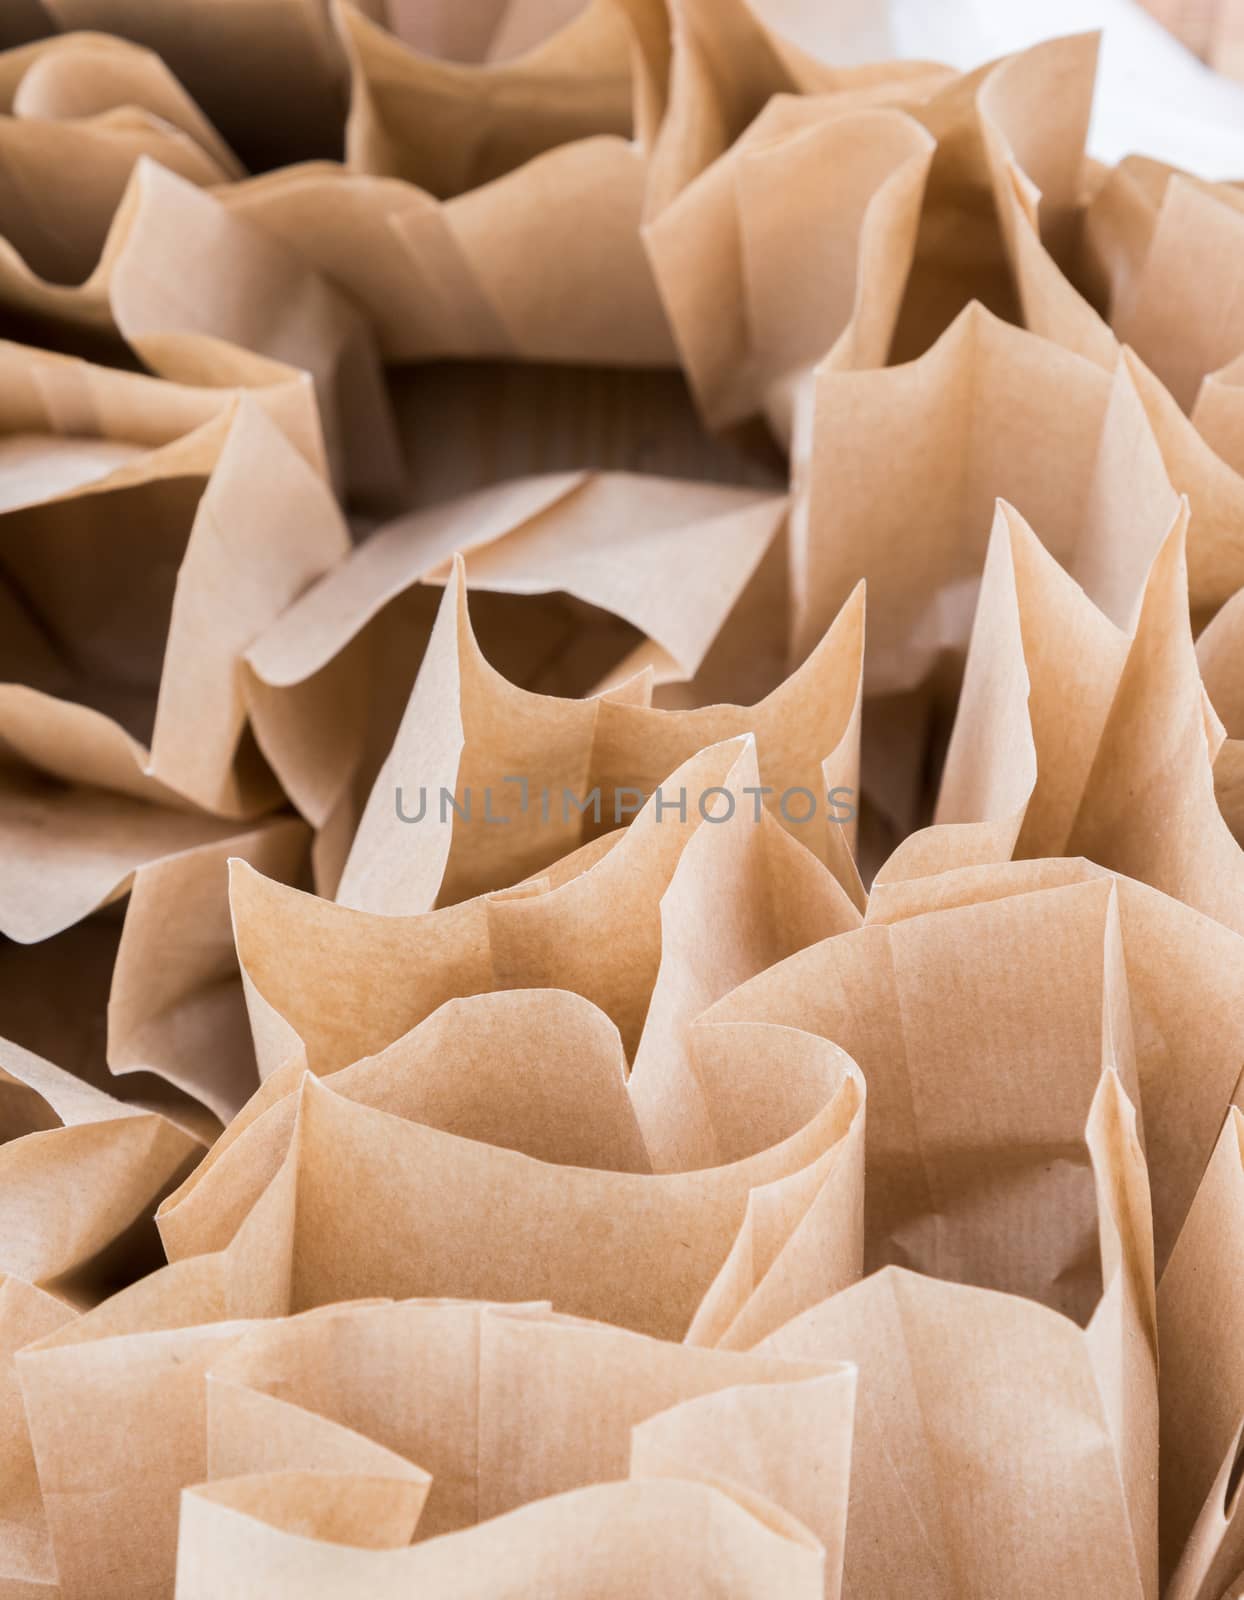 the Brown paper disposable bags in the pile